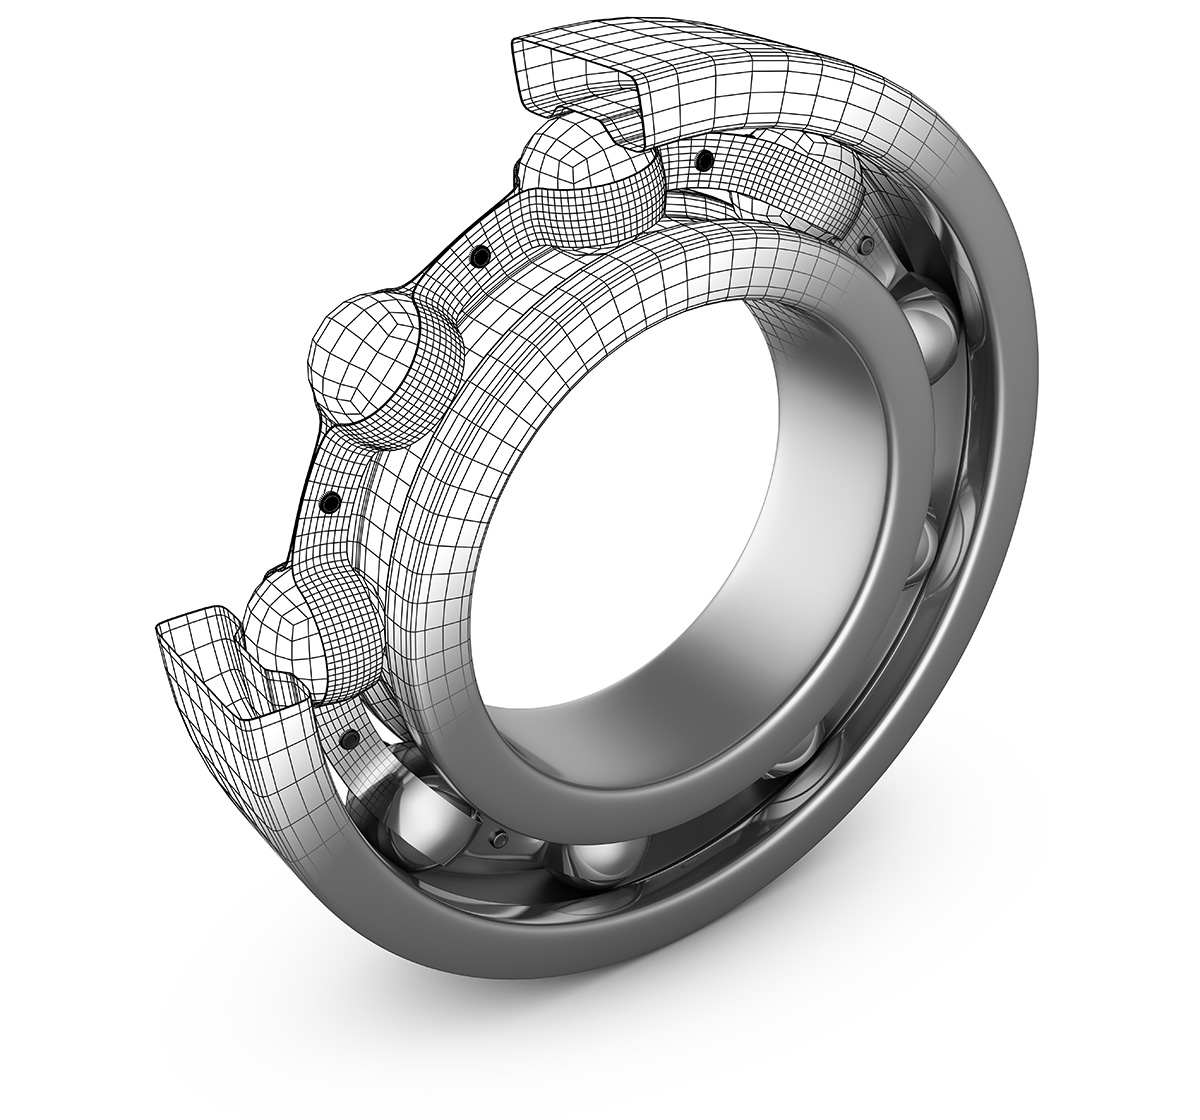 A picture of a bearing